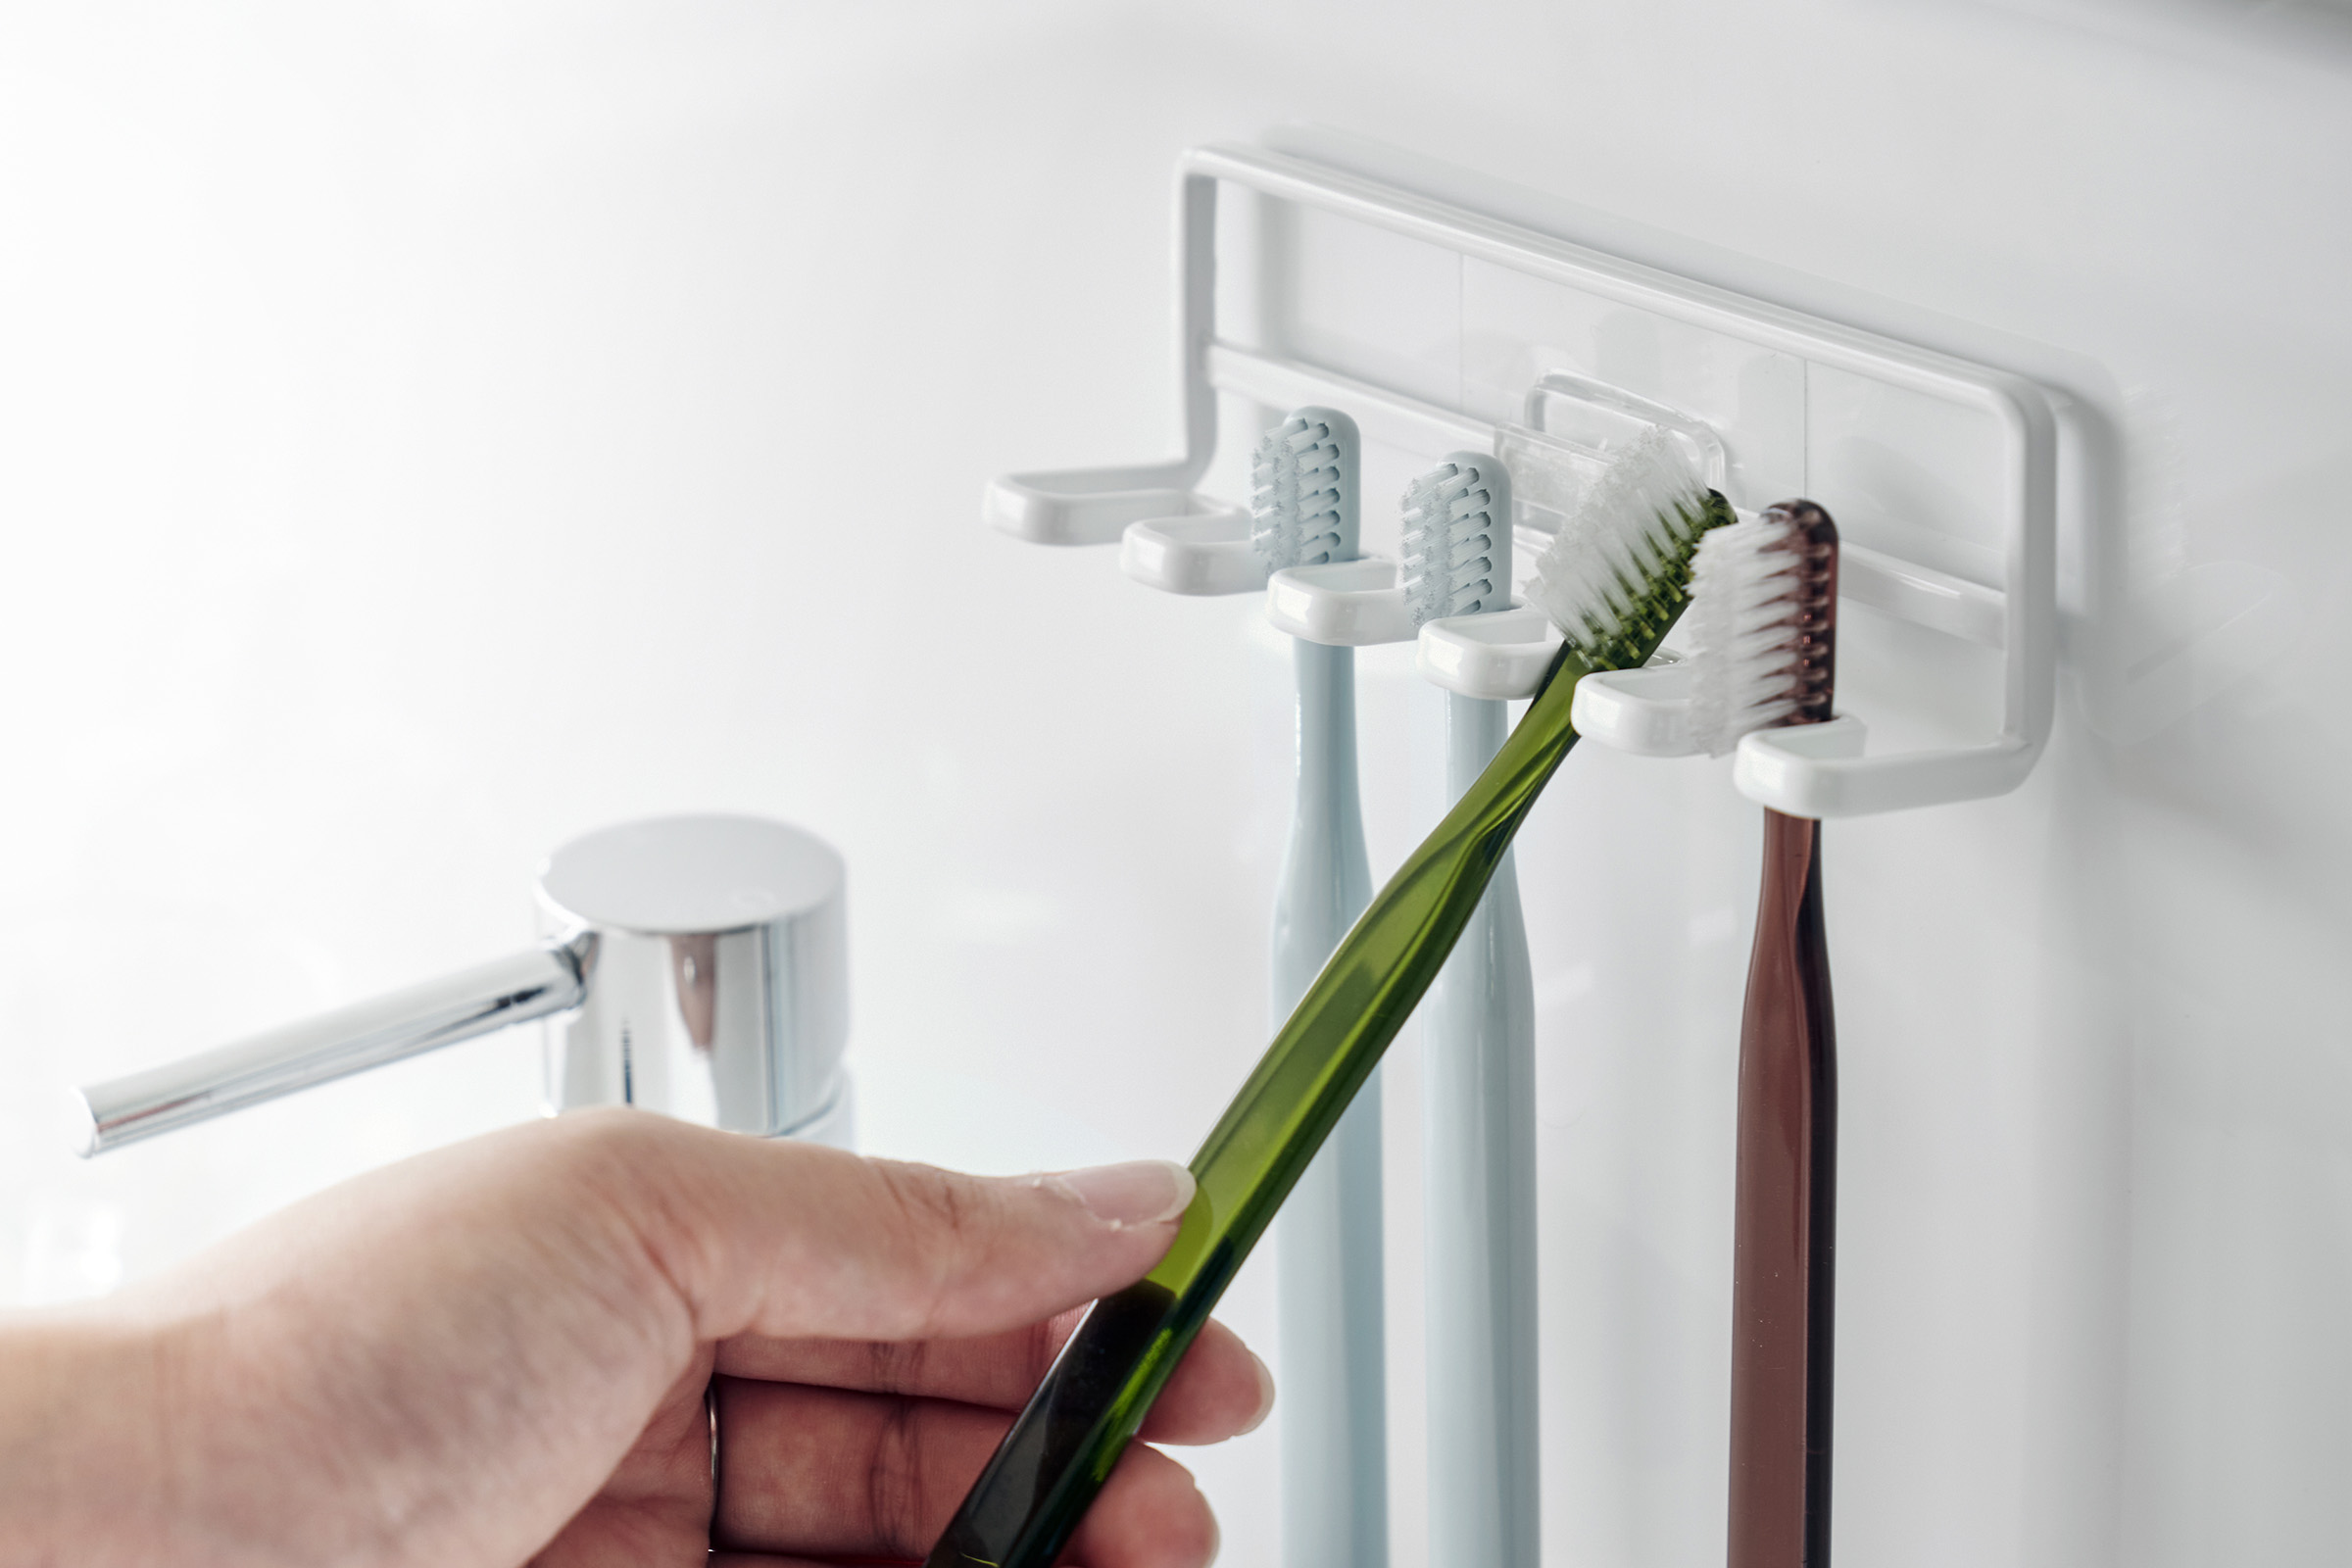 Yamazaki Home's Traceless Adhesive Toothbrush Holder, white, mounted on a bathroom wall with four colorful toothbrushes and a chrome faucet.